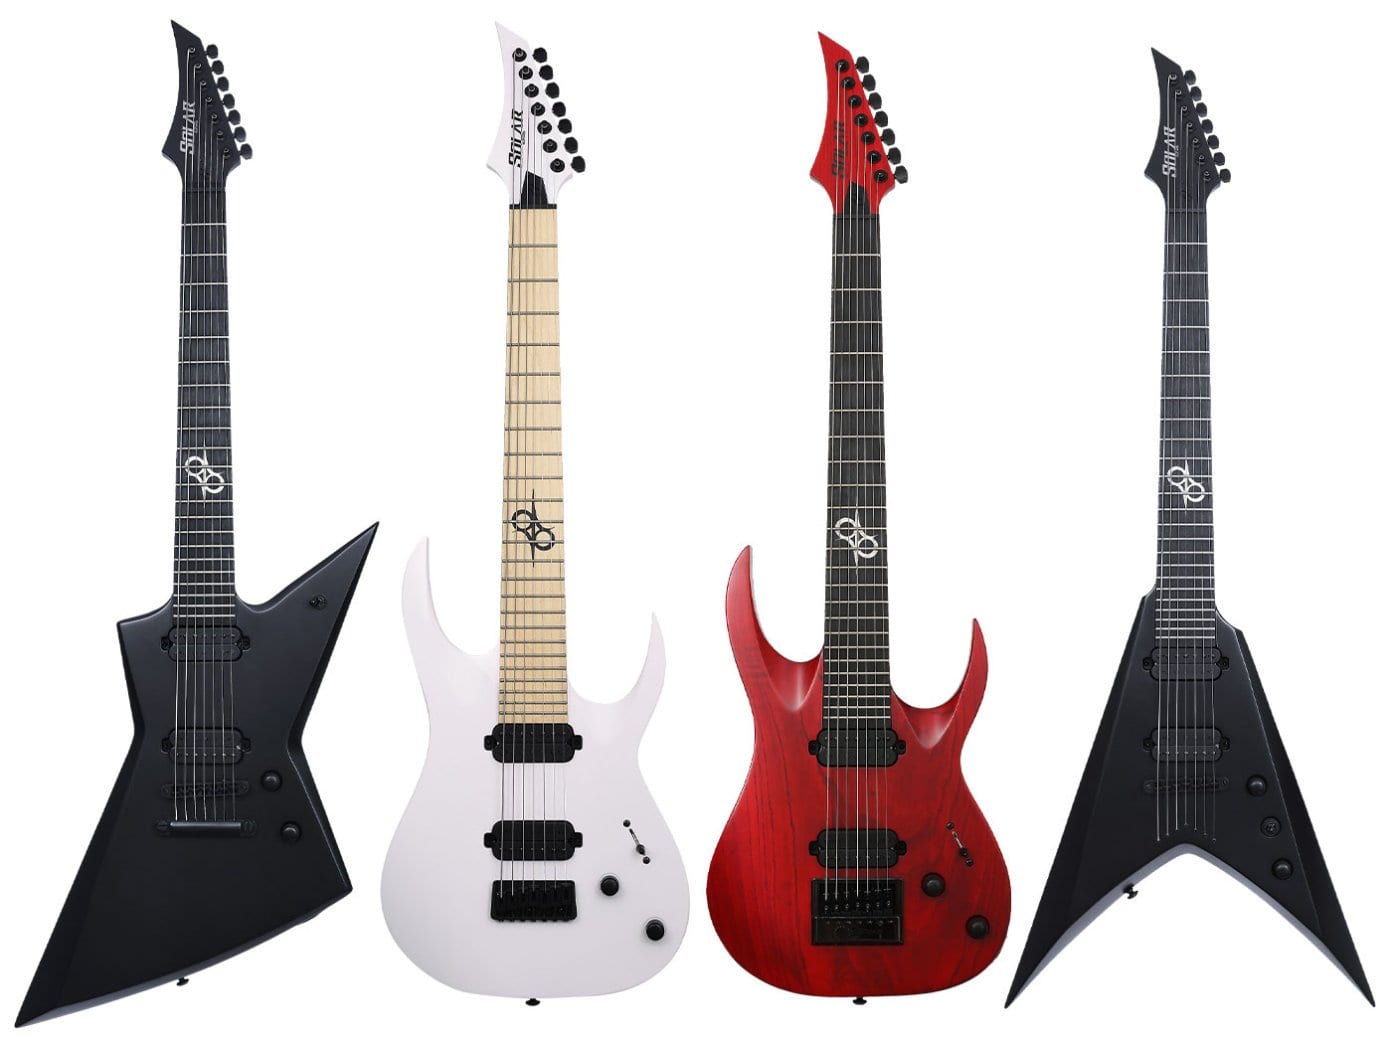 Solar Guitars launches four new seven-string models